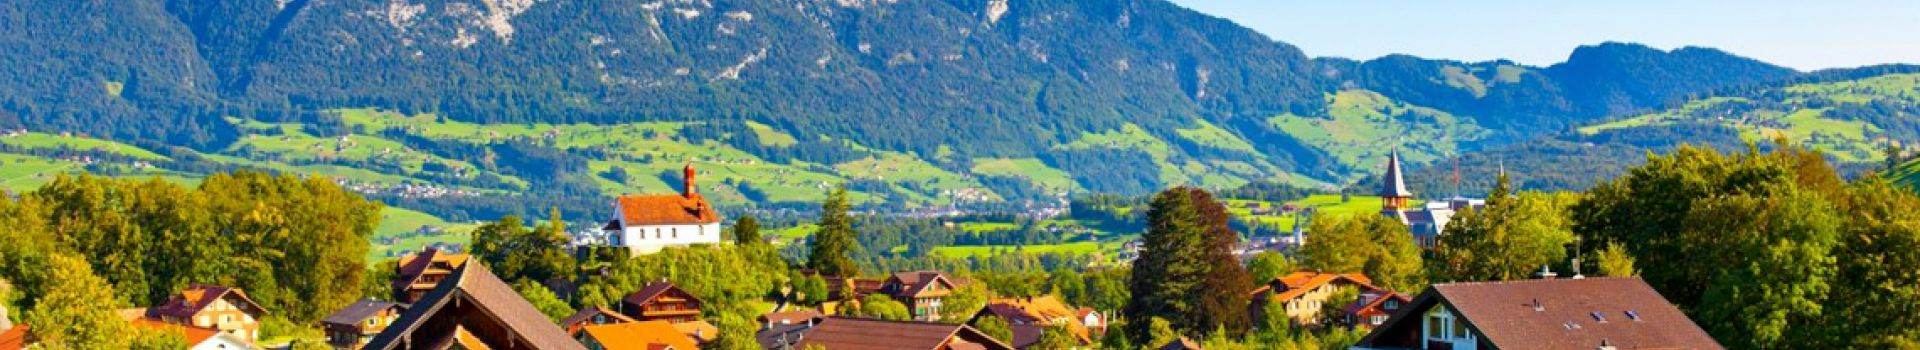 Country Destination Page - Holidays to Switzerland - Cassidy Travel